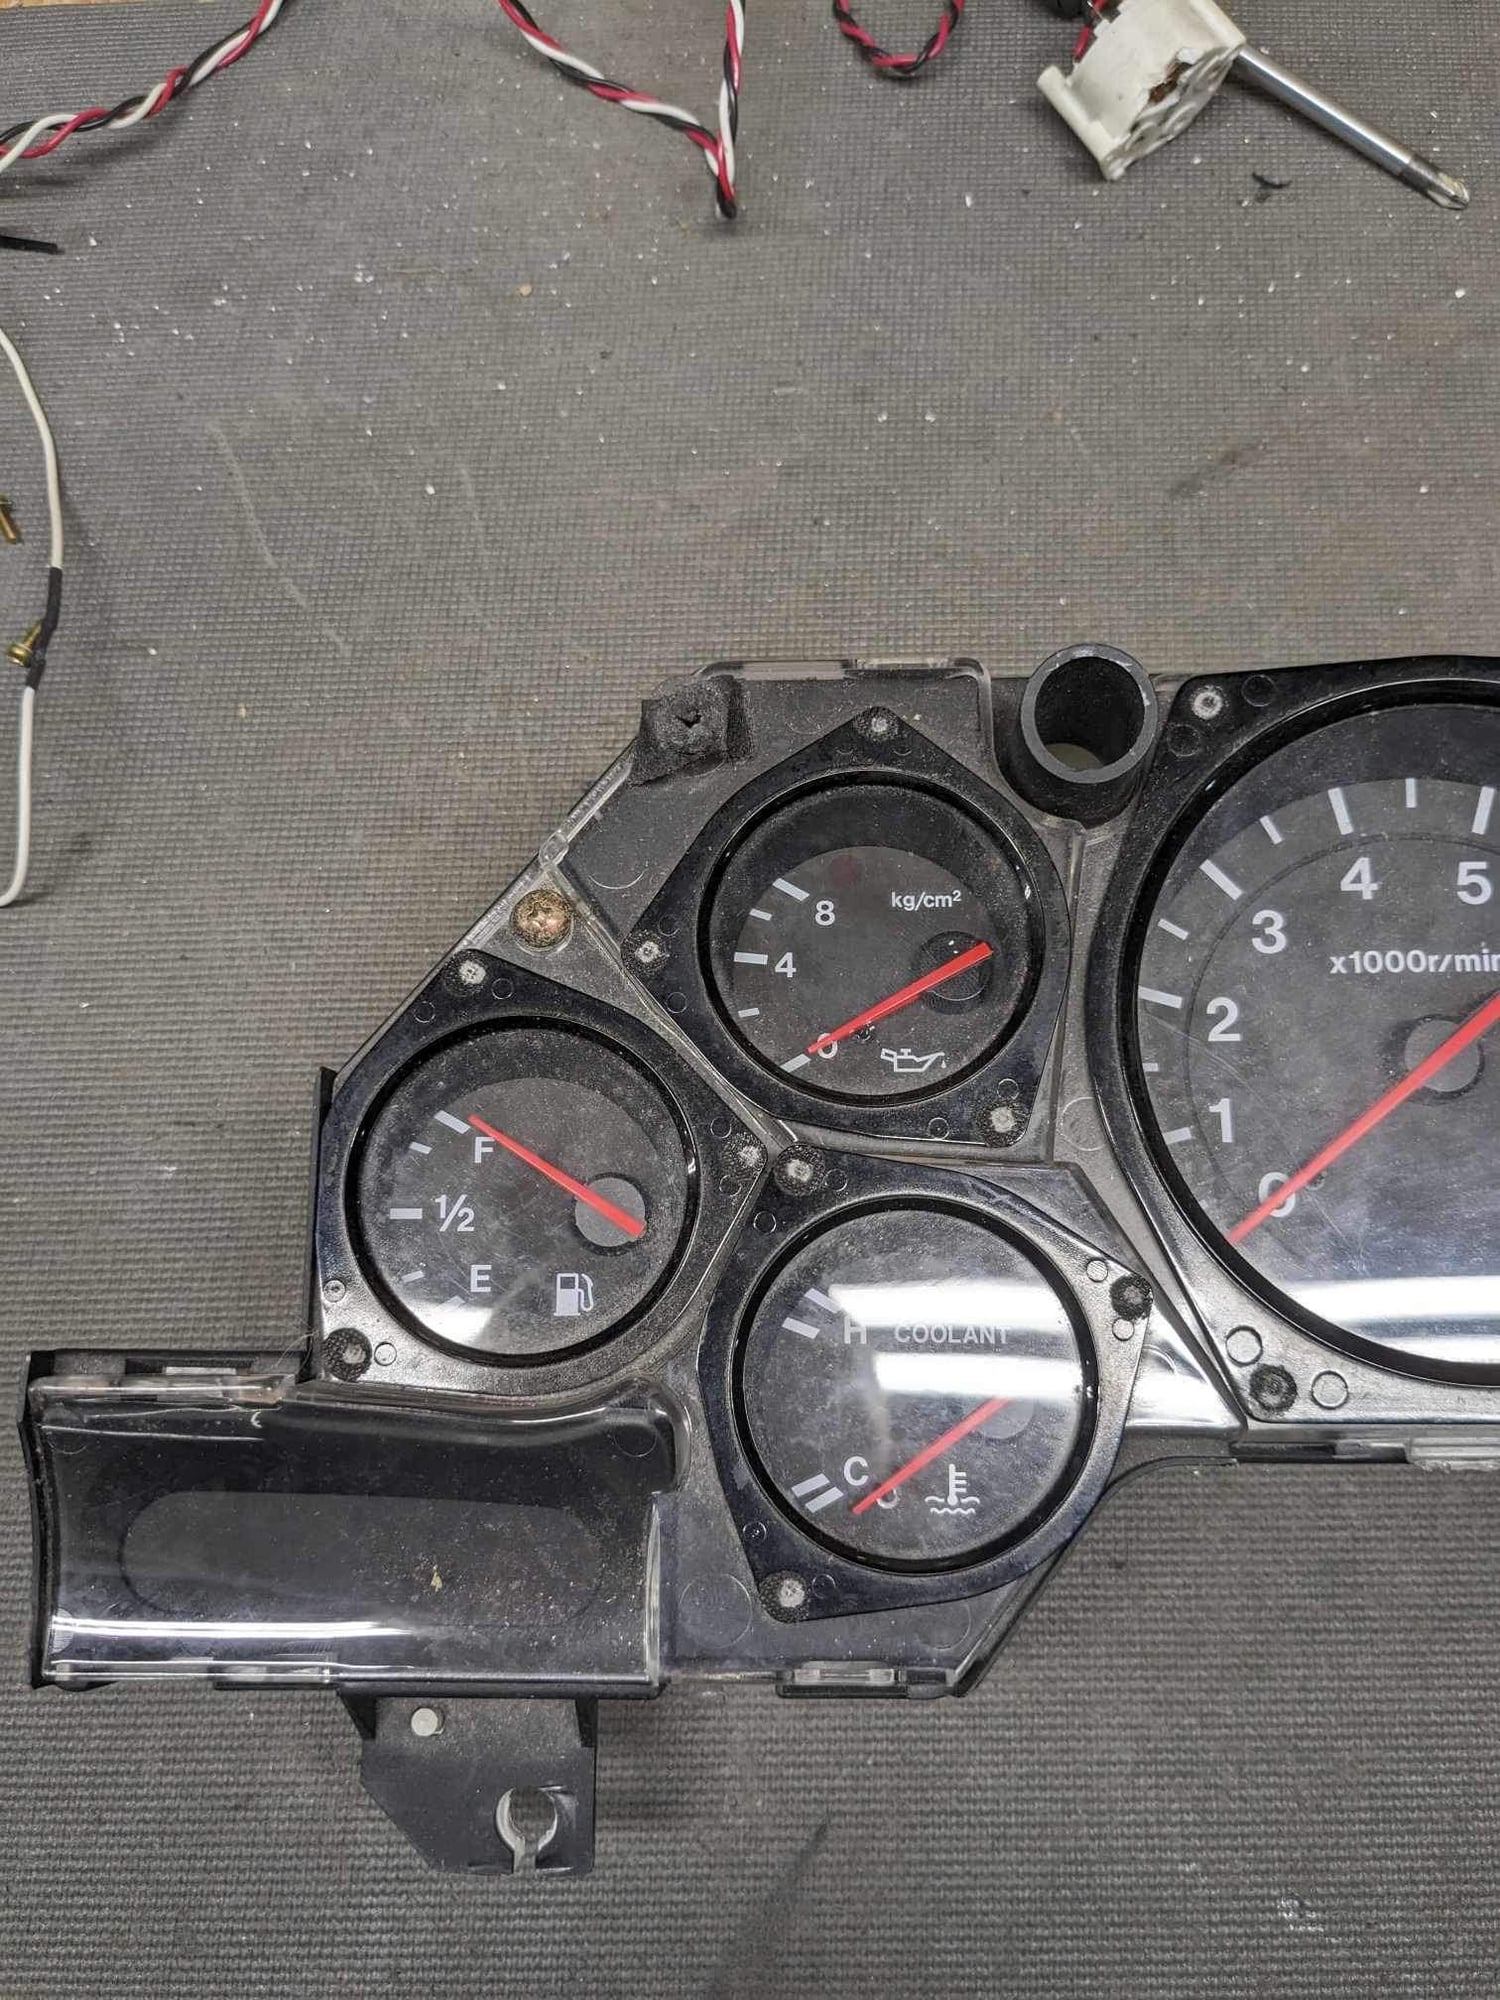 Interior/Upholstery - Refurbished FD Instrument Clusters (JDM and 99 spec) - Used - 1992 to 2002 Mazda RX-7 - London HA27DY, United Kingdom